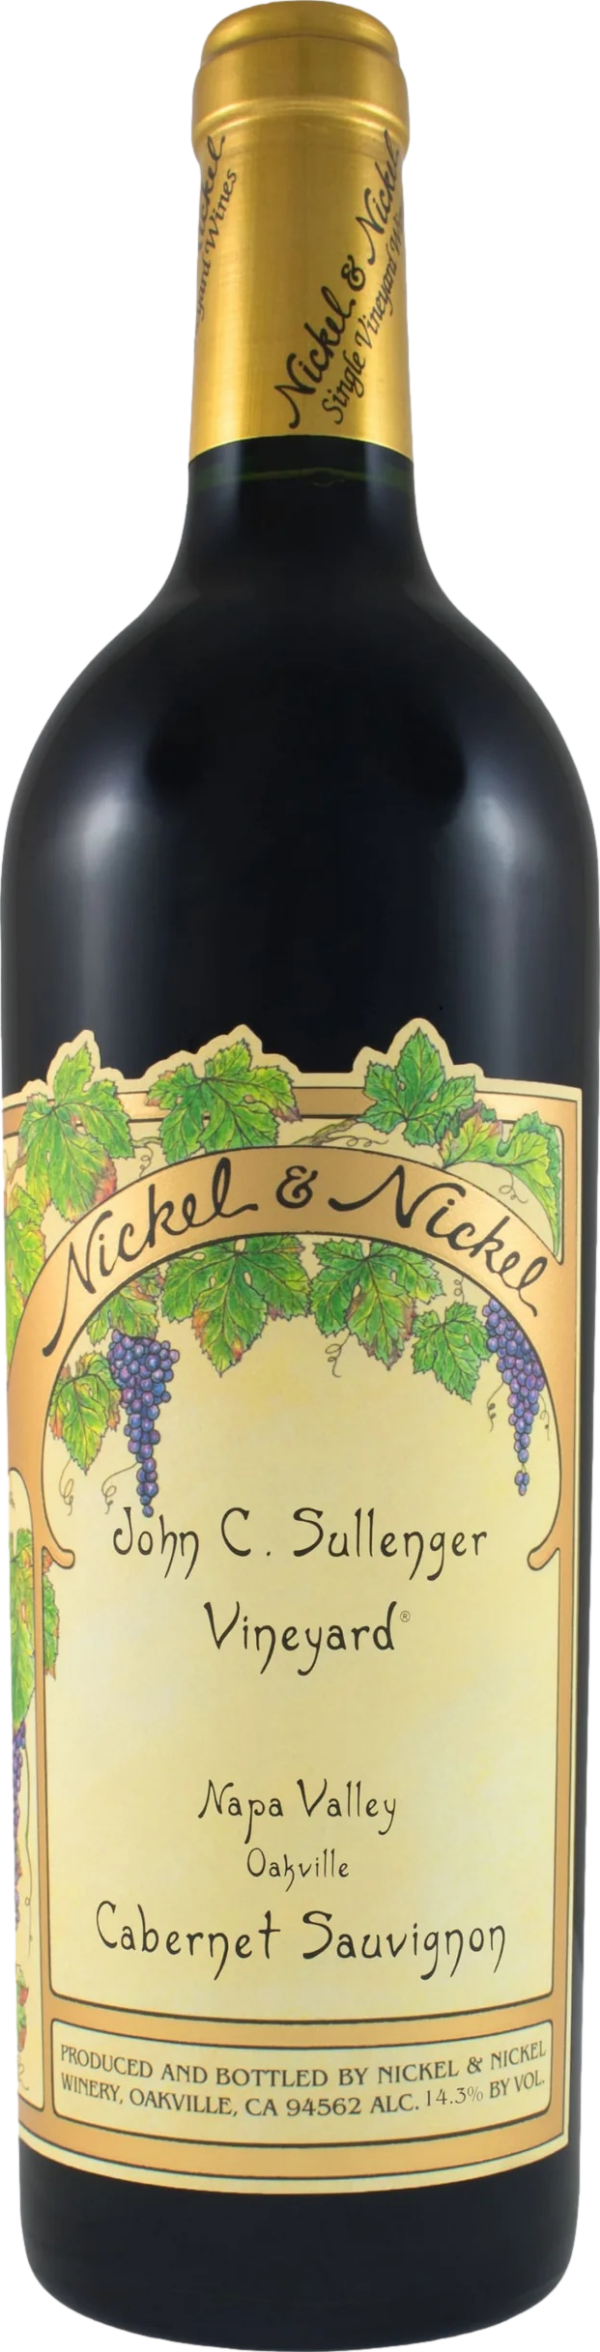 Product image of Nickel & Nickel John C. Sullenger Cabernet Sauvignon 2019 from 8wines